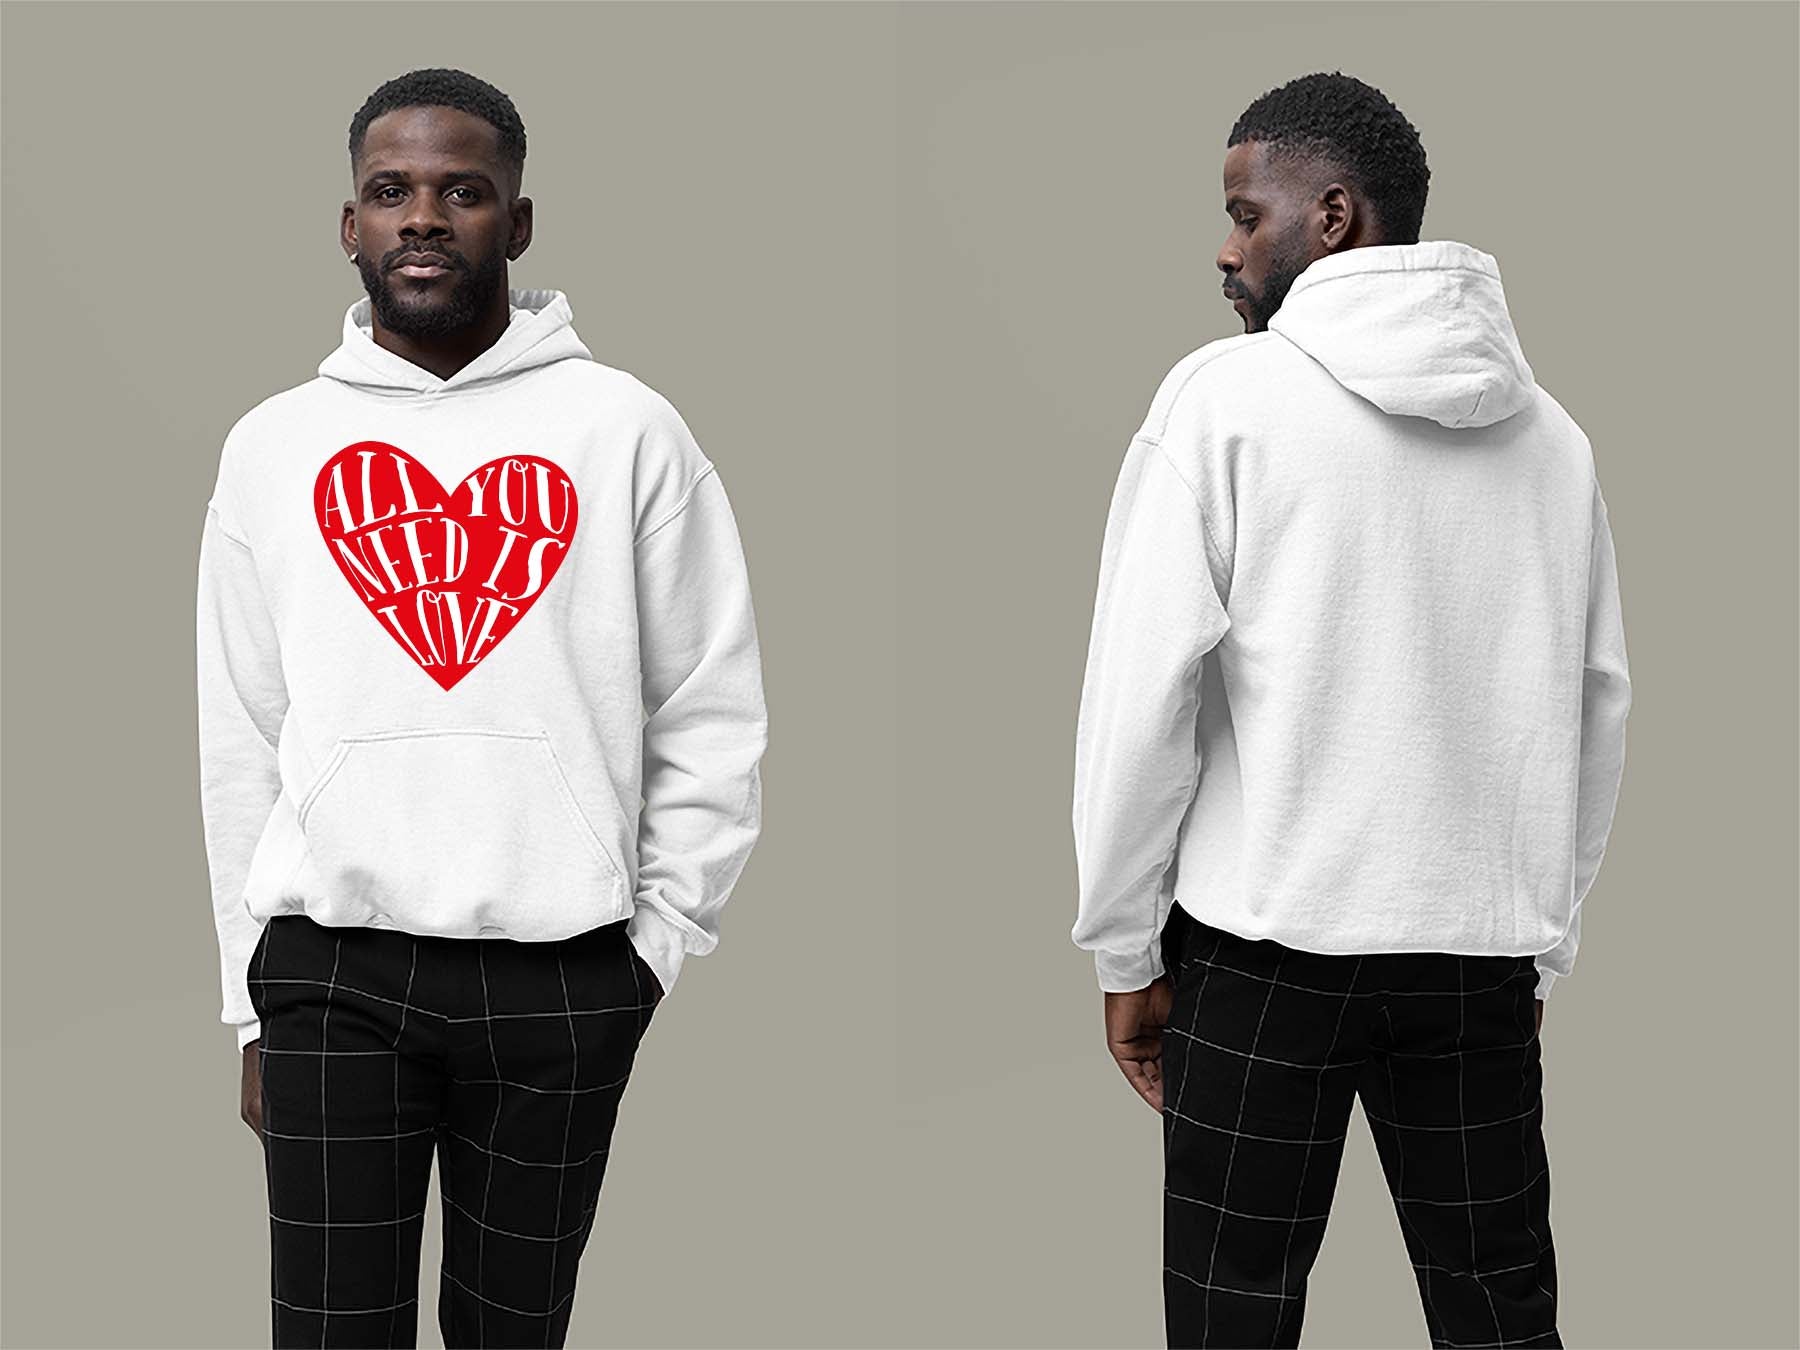 Fat Dave All You Need is Love Hoodie Small White